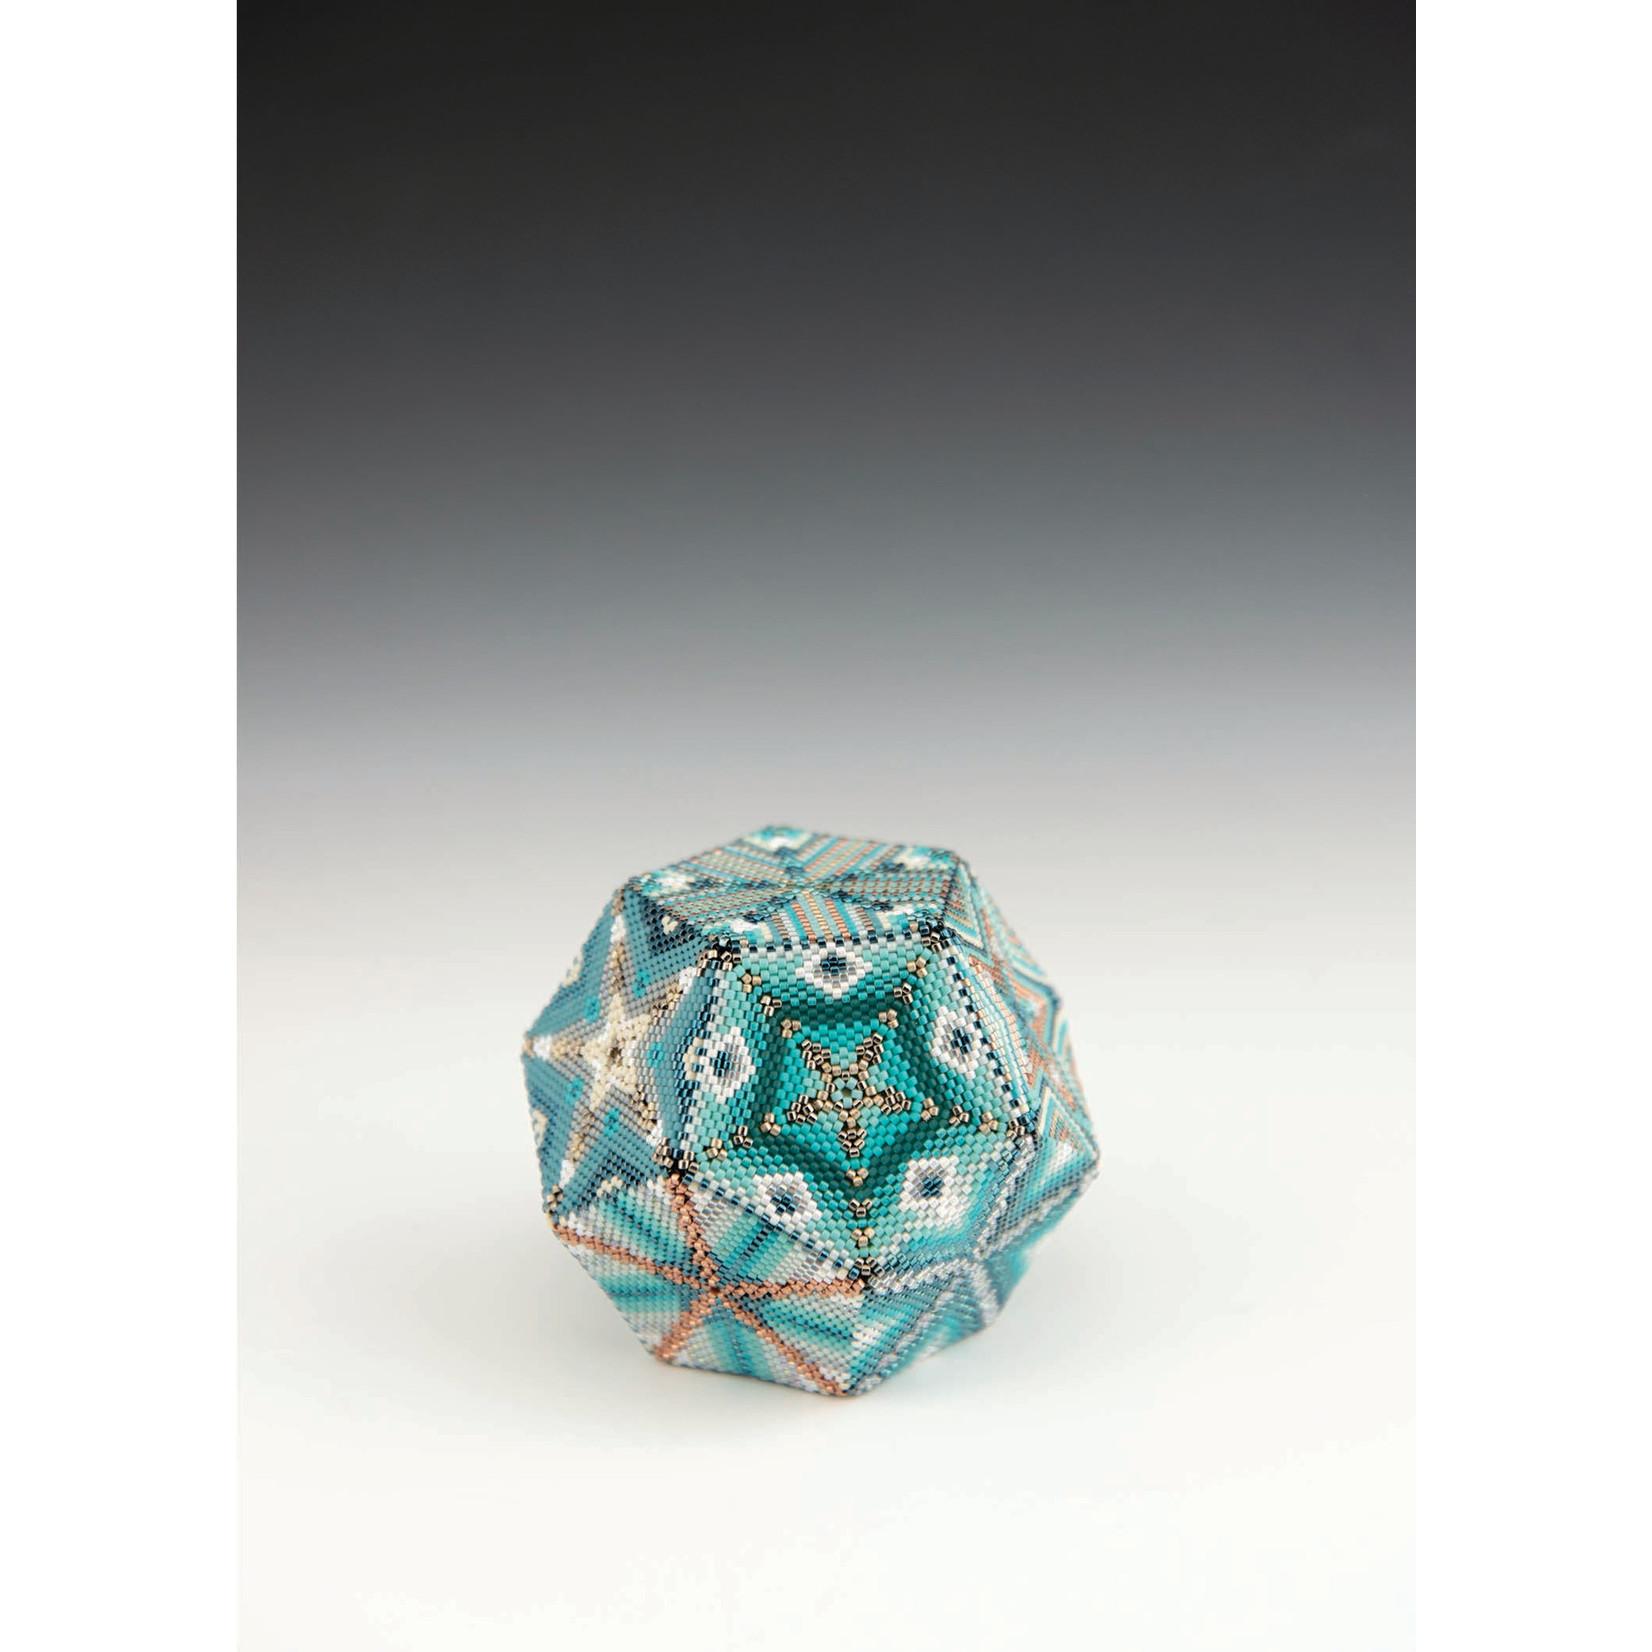 Stirling Studios Beaded Dodecahedron - 12 sided geometric solid